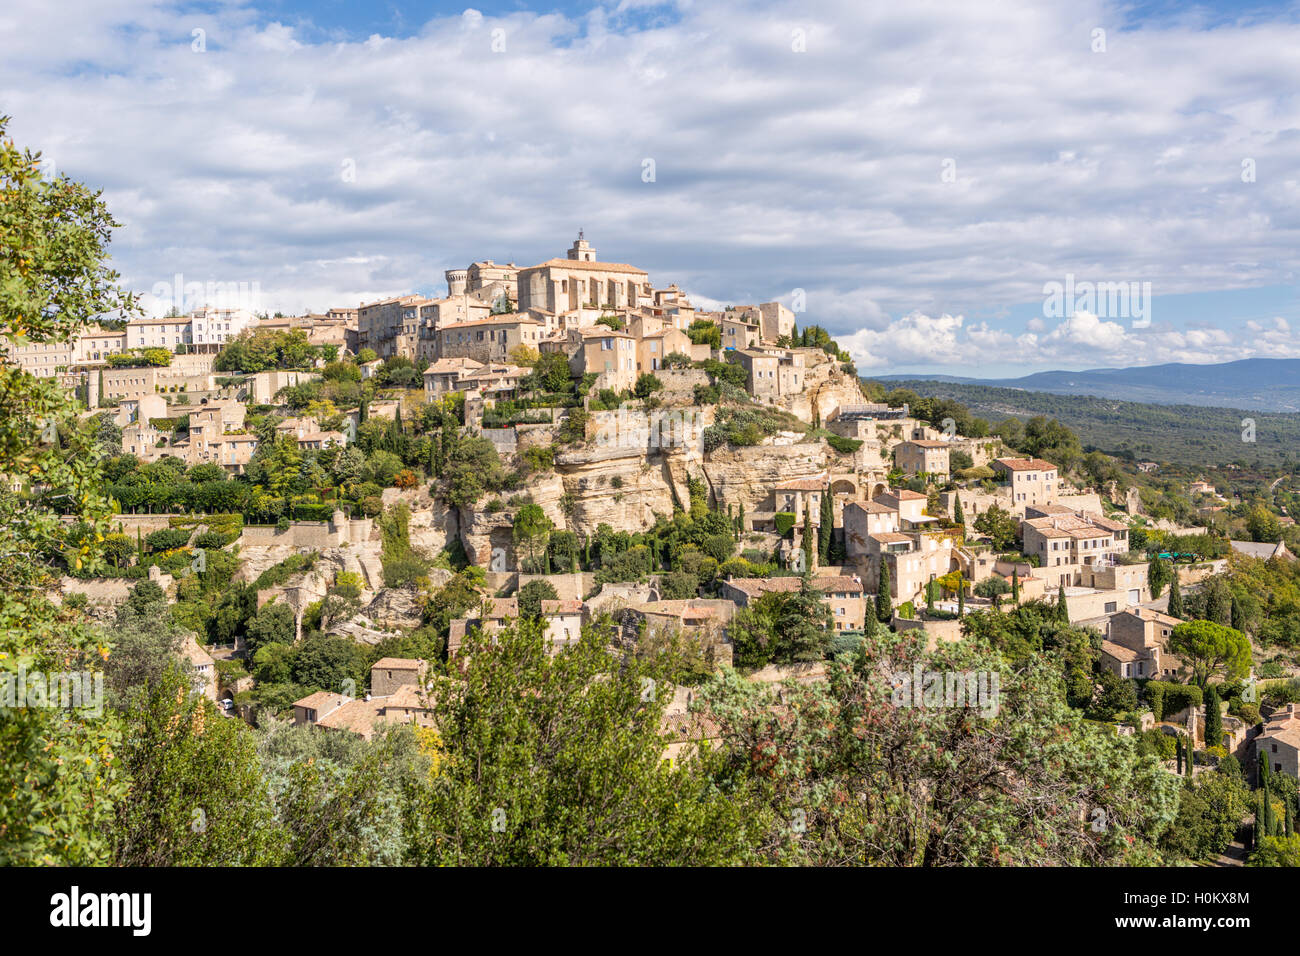 Long view of hill town of Gordes, Luberon, Provence, France Stock Photo